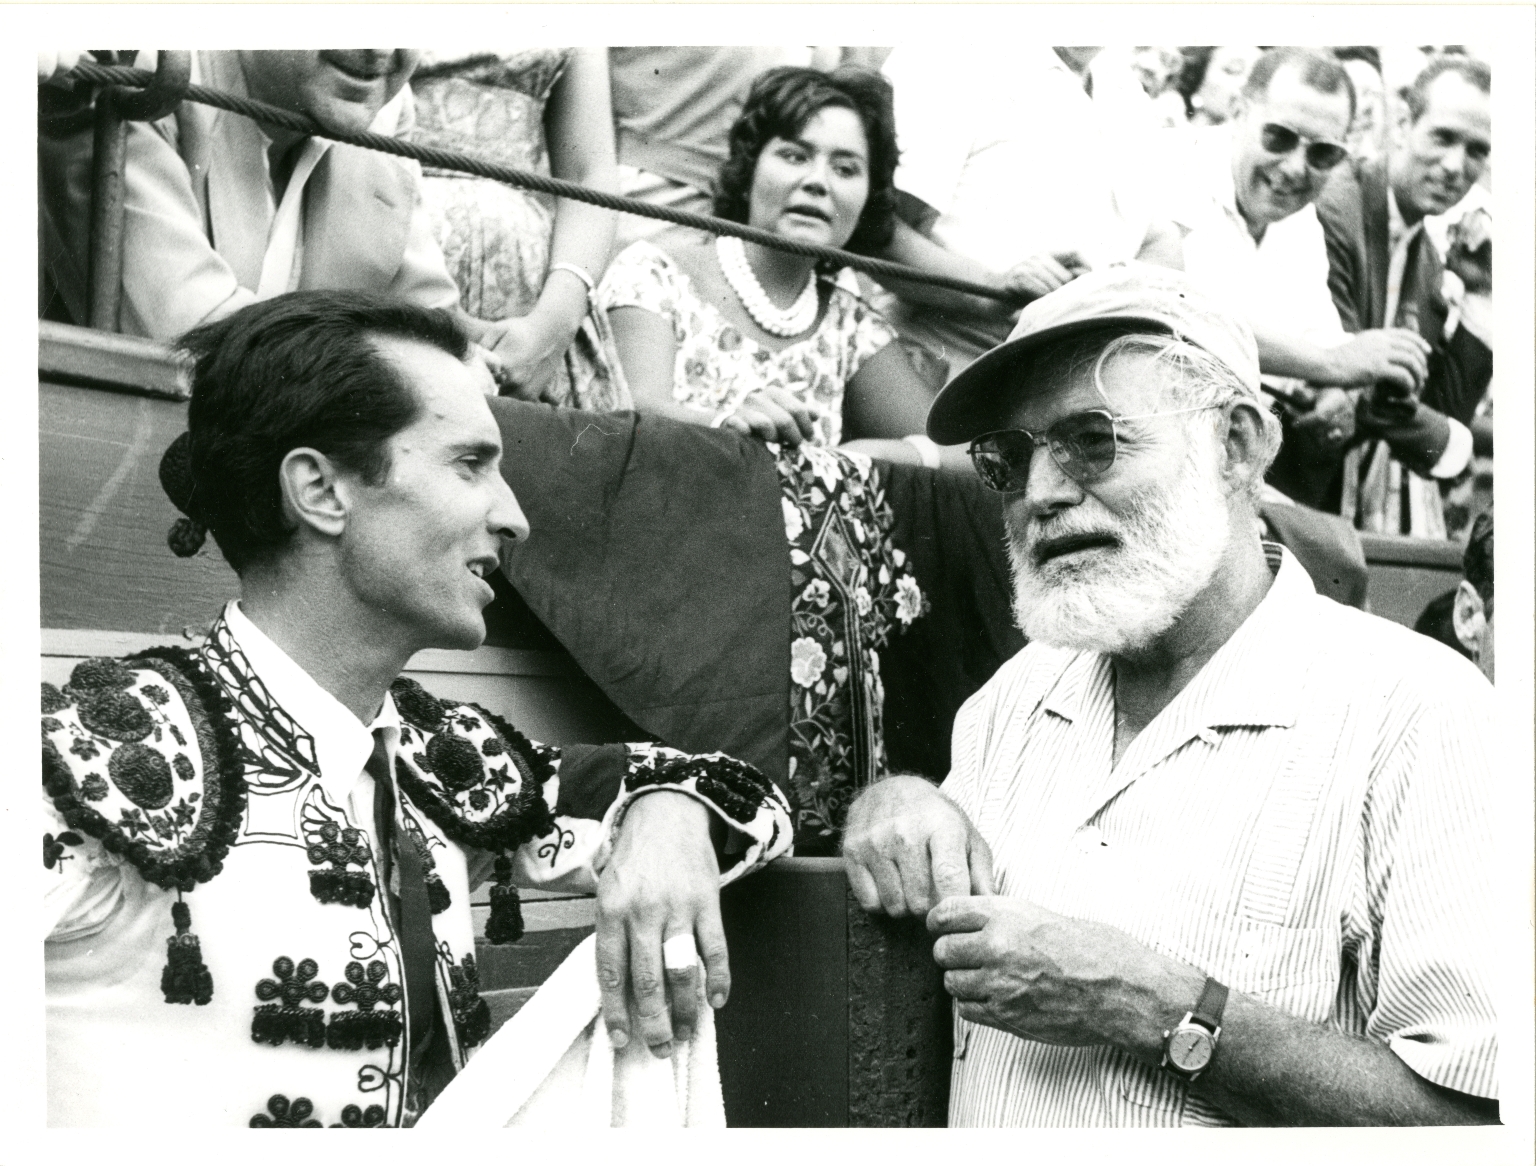 Hemingway and Ordonez at Bullfight, Drinking From Flask